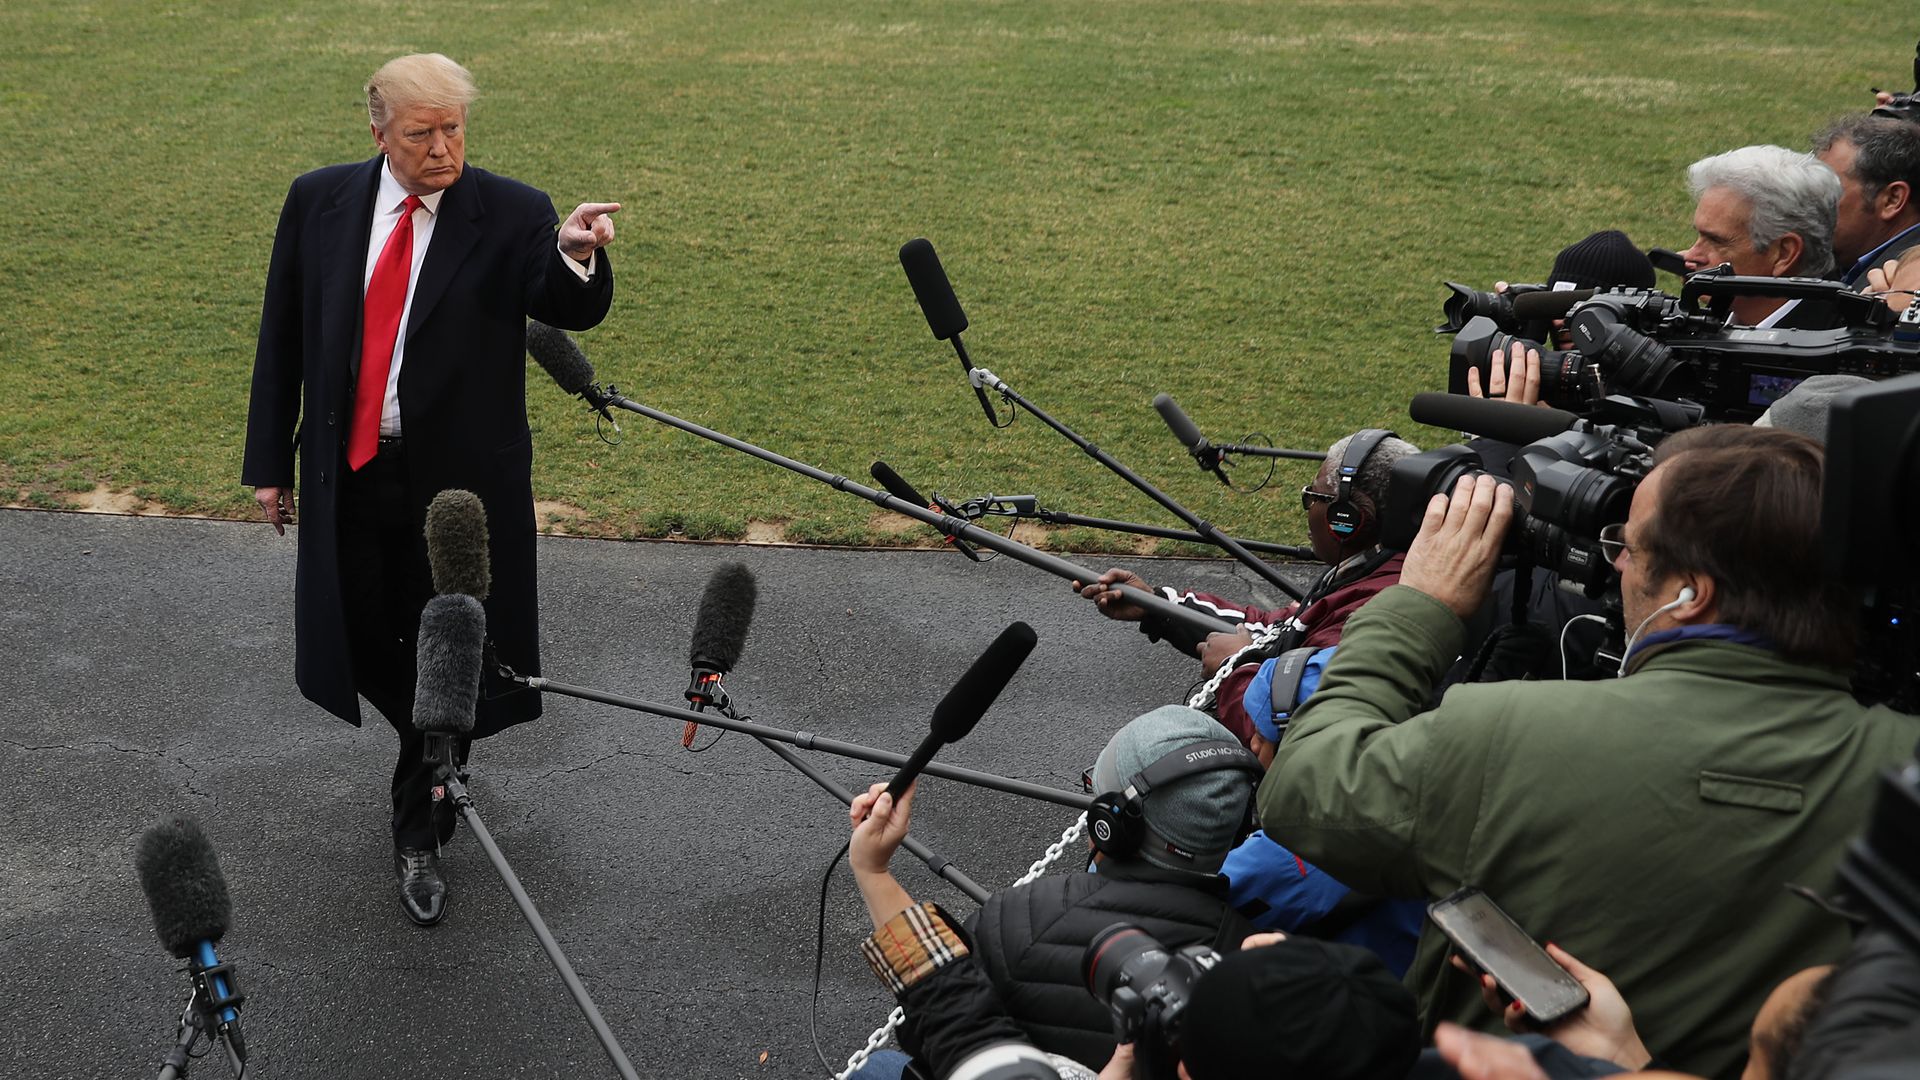 Trump pointing at reporters